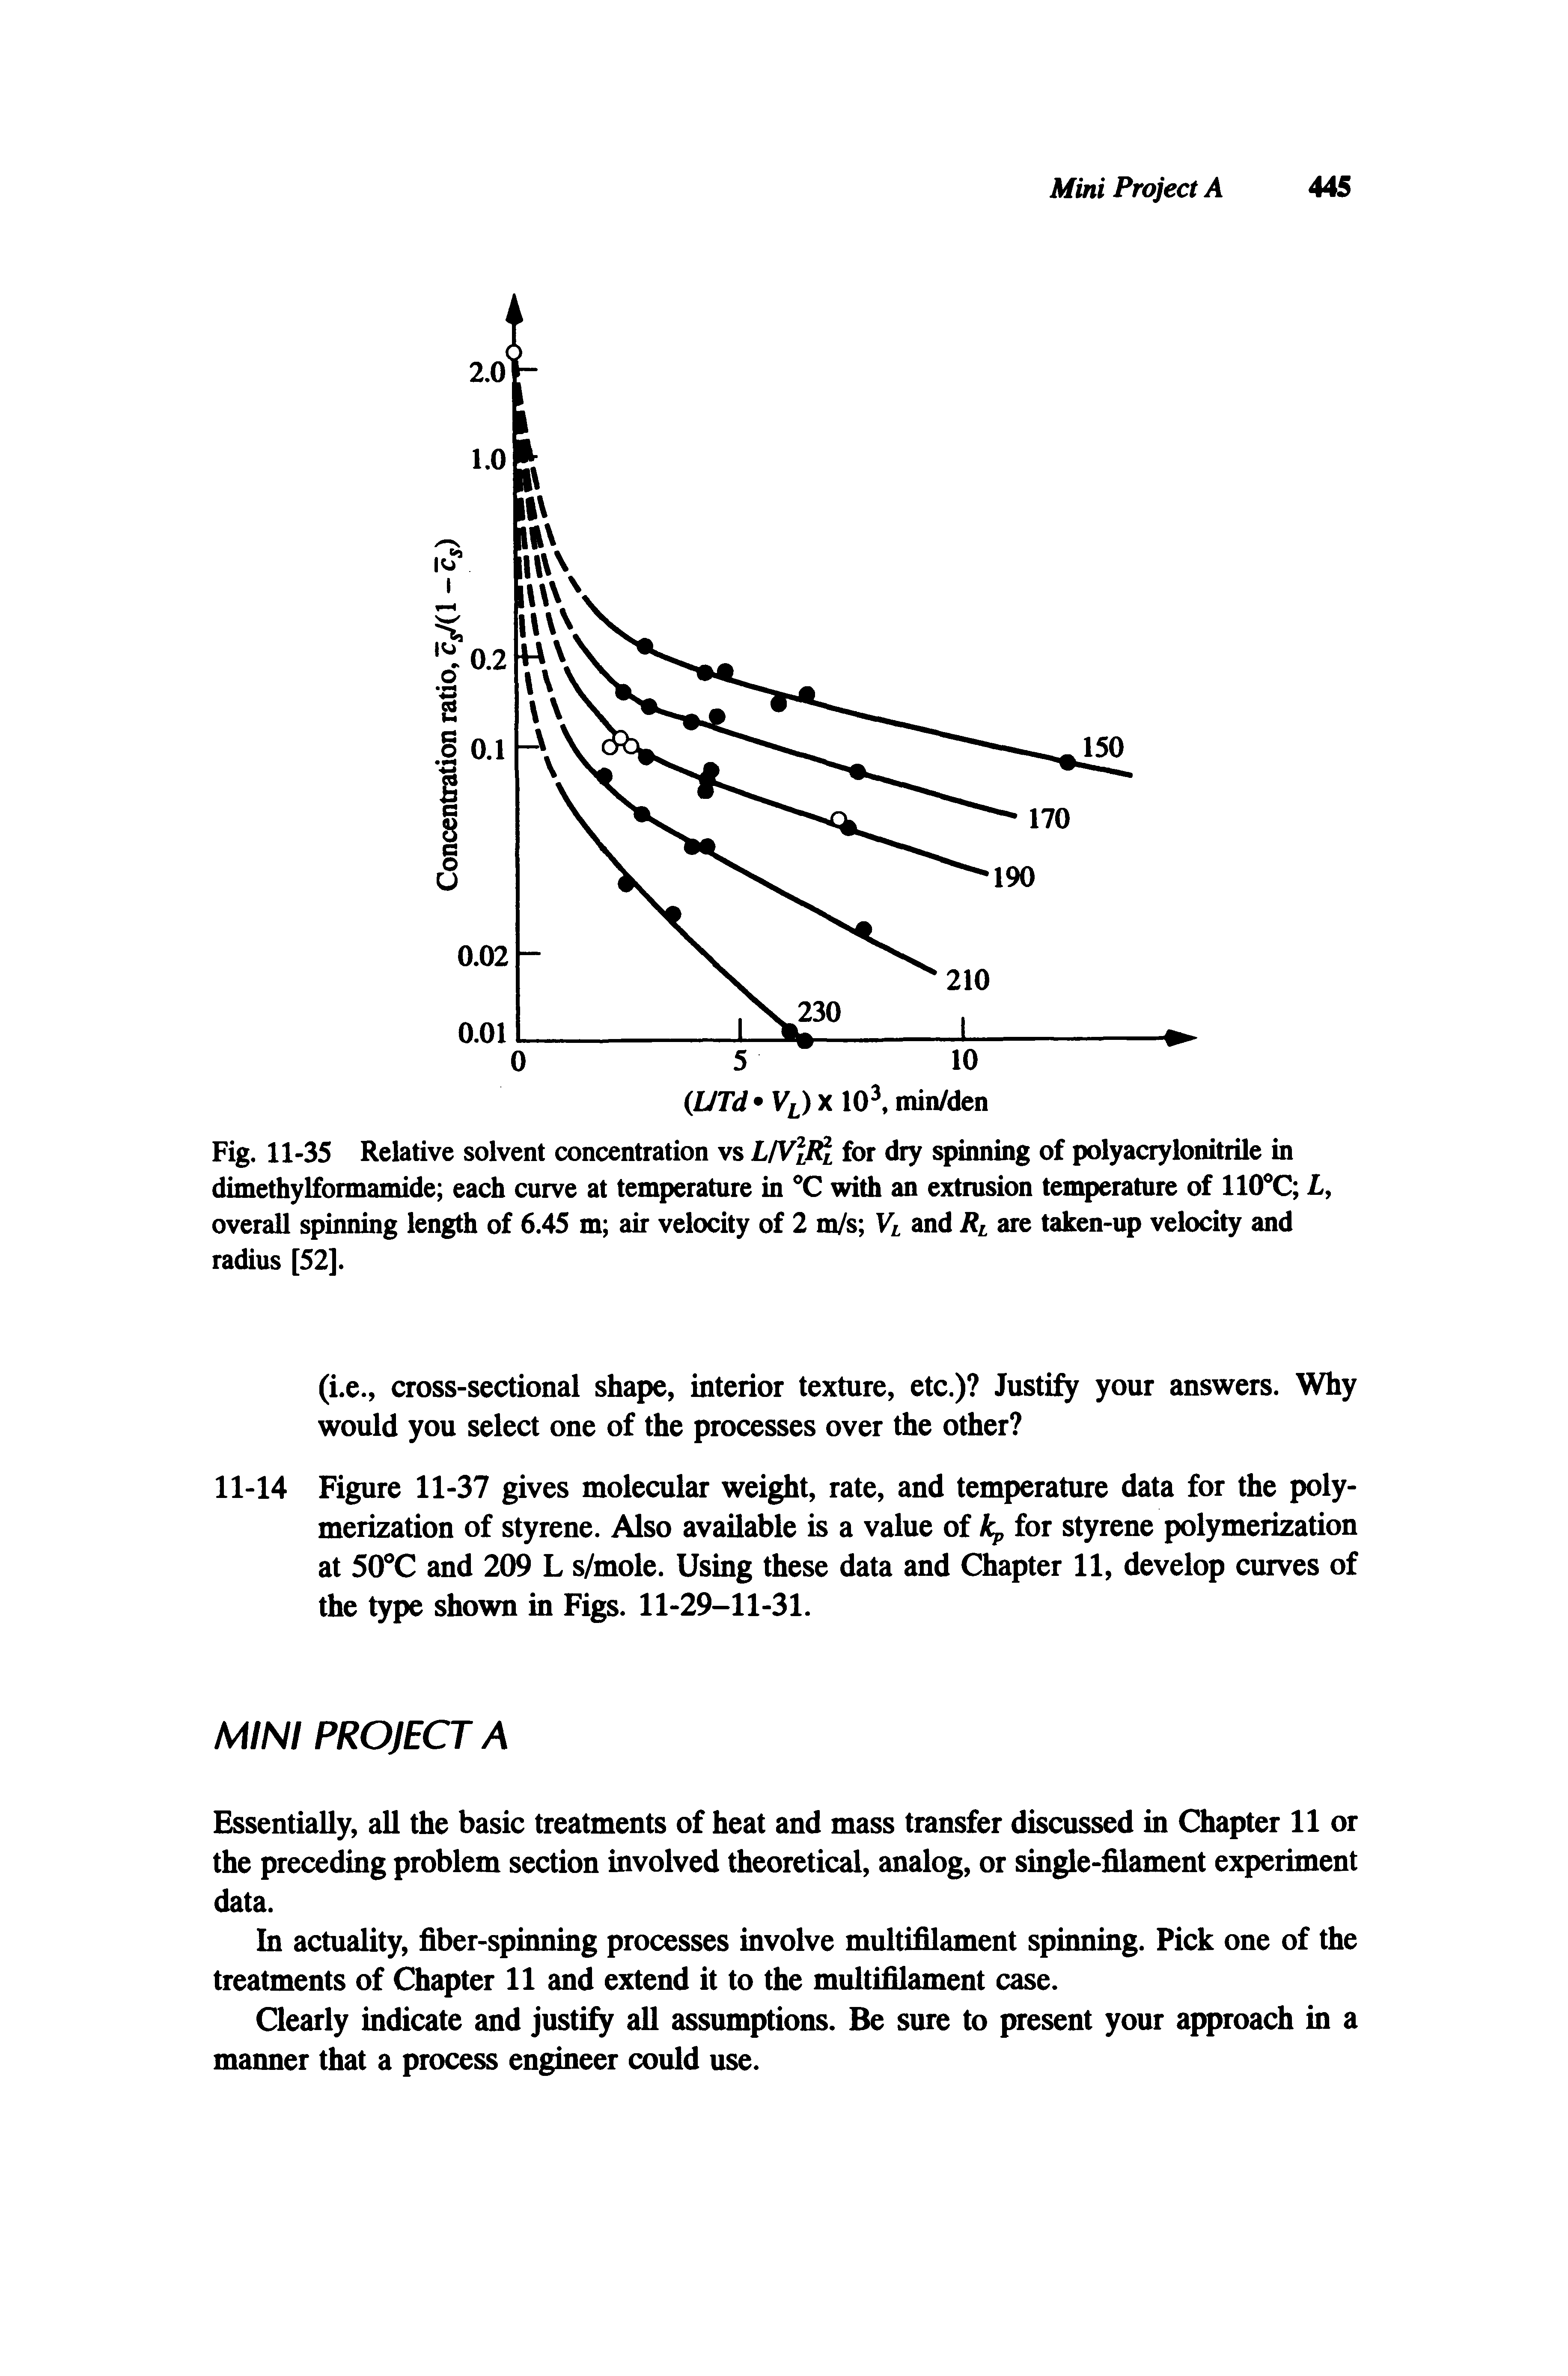 Fig. 11-35 Relative solvent concentration vs LIVl for dry spinning of polyacrylonitrile in dimethylformamide each curve at temperature in with an extrusion temperature of llO C L, overall spinning length of 6.45 m air velocity of 2 m/s Vl and Rl are taken-up velocity and radius [52].